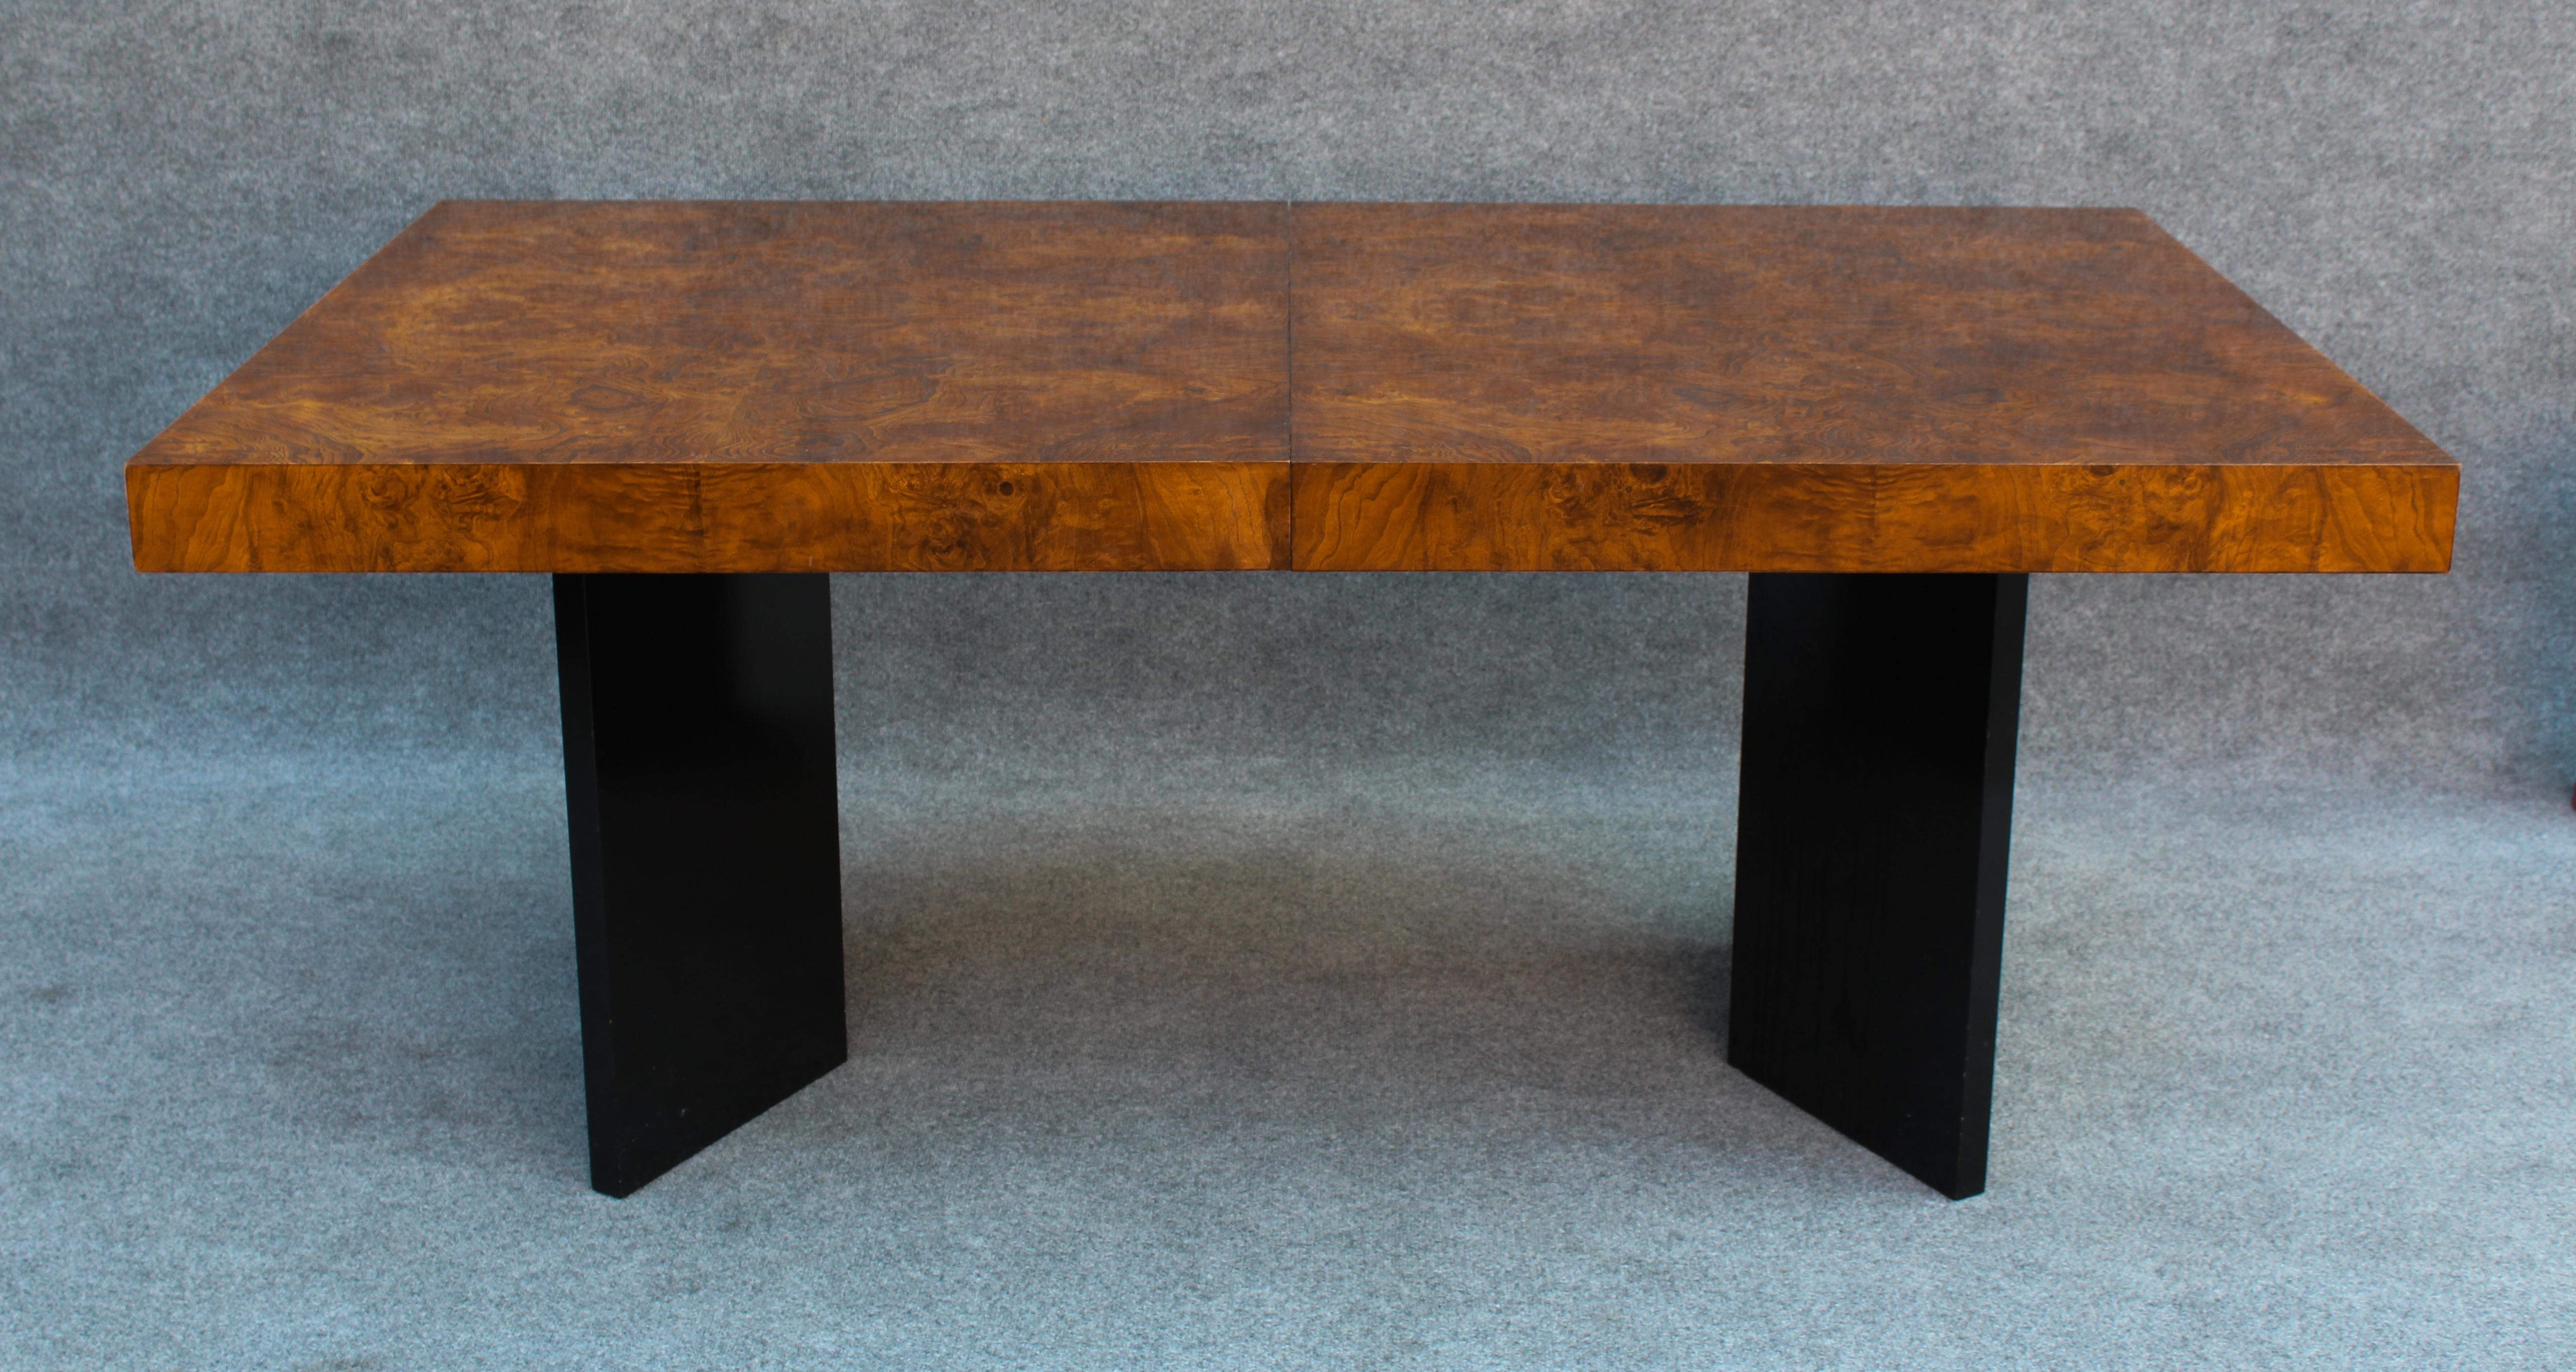 This fantastic dining table is attributed to American design legend Milo Baughman, and was likely built in the late 1970s to early 1980s. While the entire table is beautiful, the star of the show is the burl. Bookmatched to either side for a